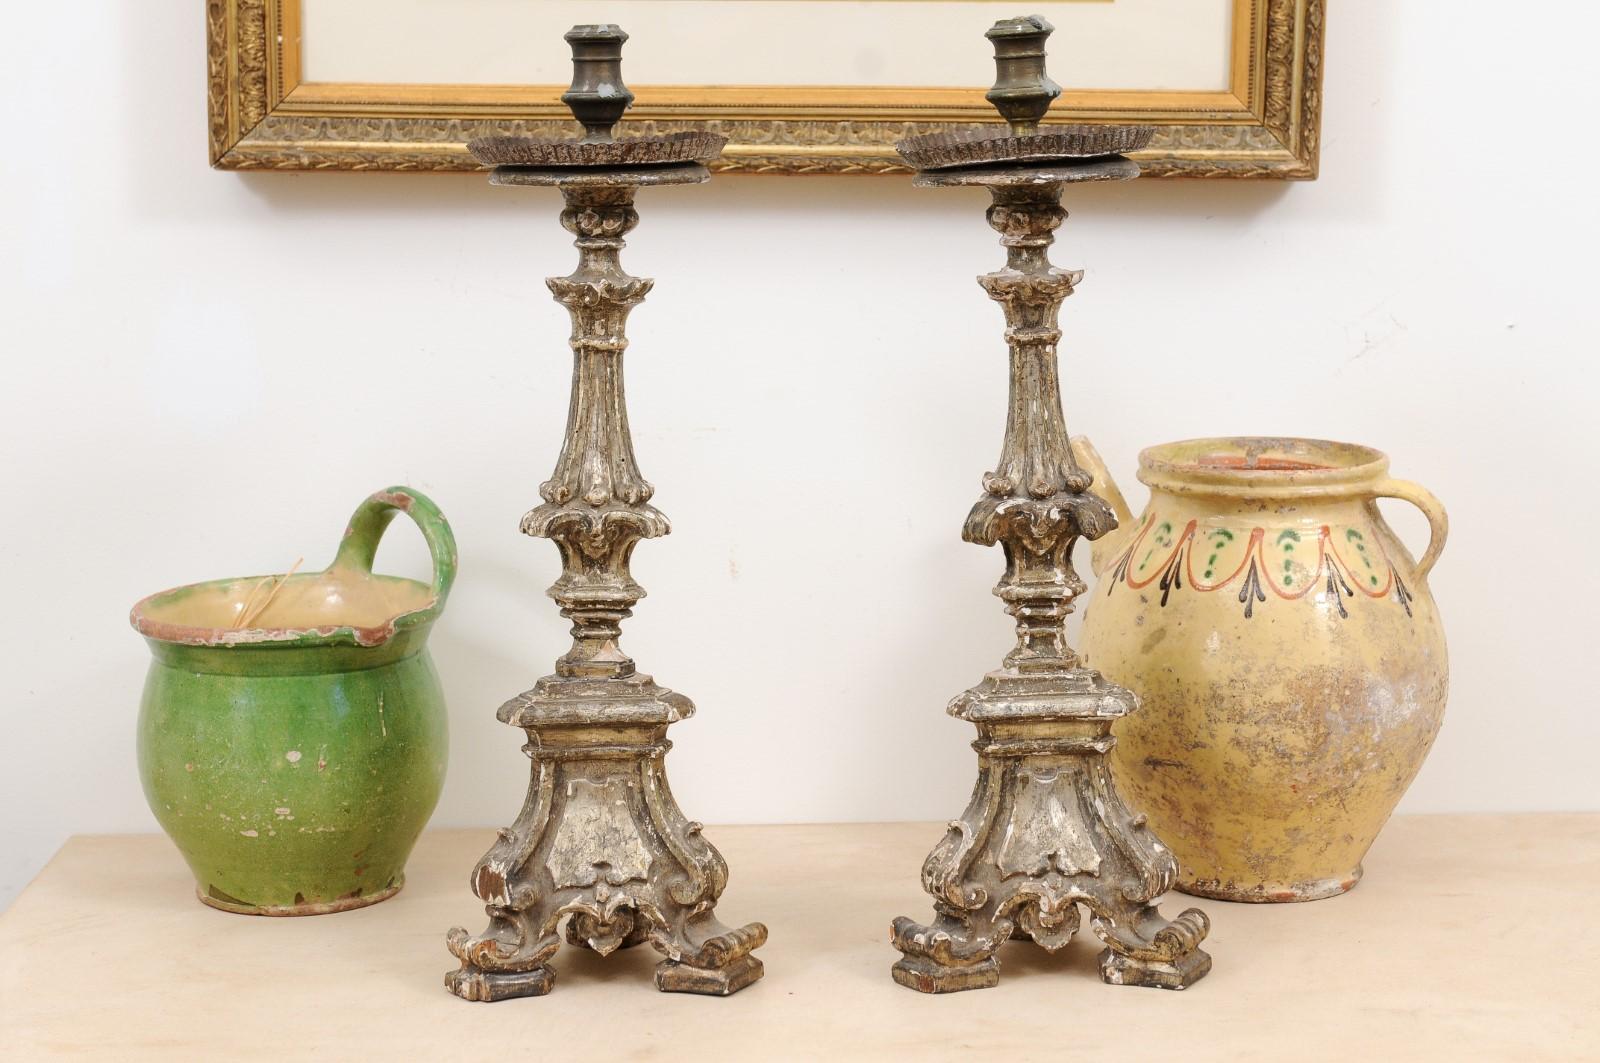 Pair of Rococo Period 18th Century Italian Painted and Carved Candlesticks For Sale 1